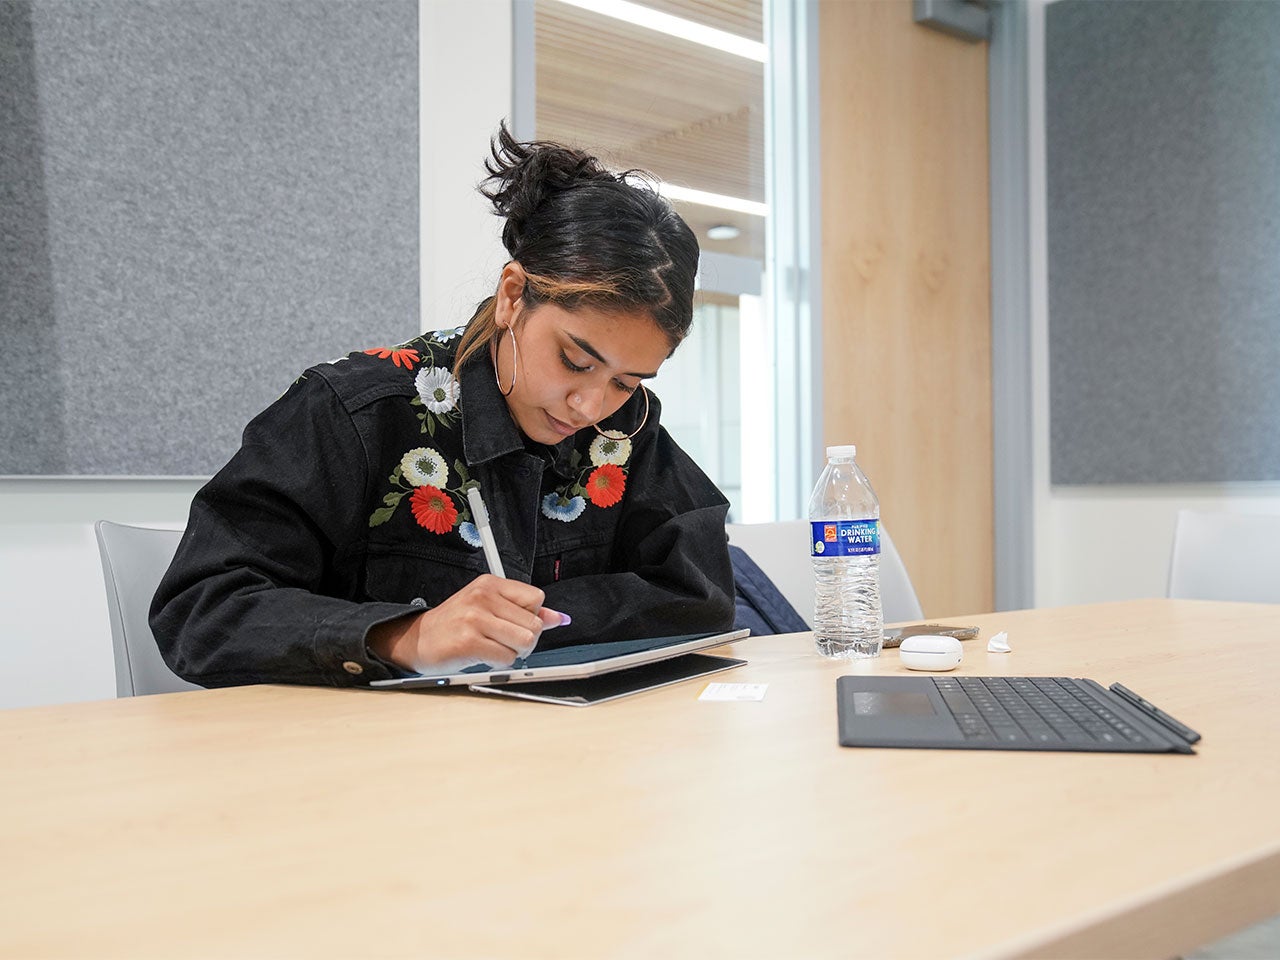 A UC Davis student, wearing hoop earrings and a black denim jacket with floral embroidery, takes notes on a tablet in UC Davis' Center for Educational Effectiveness.